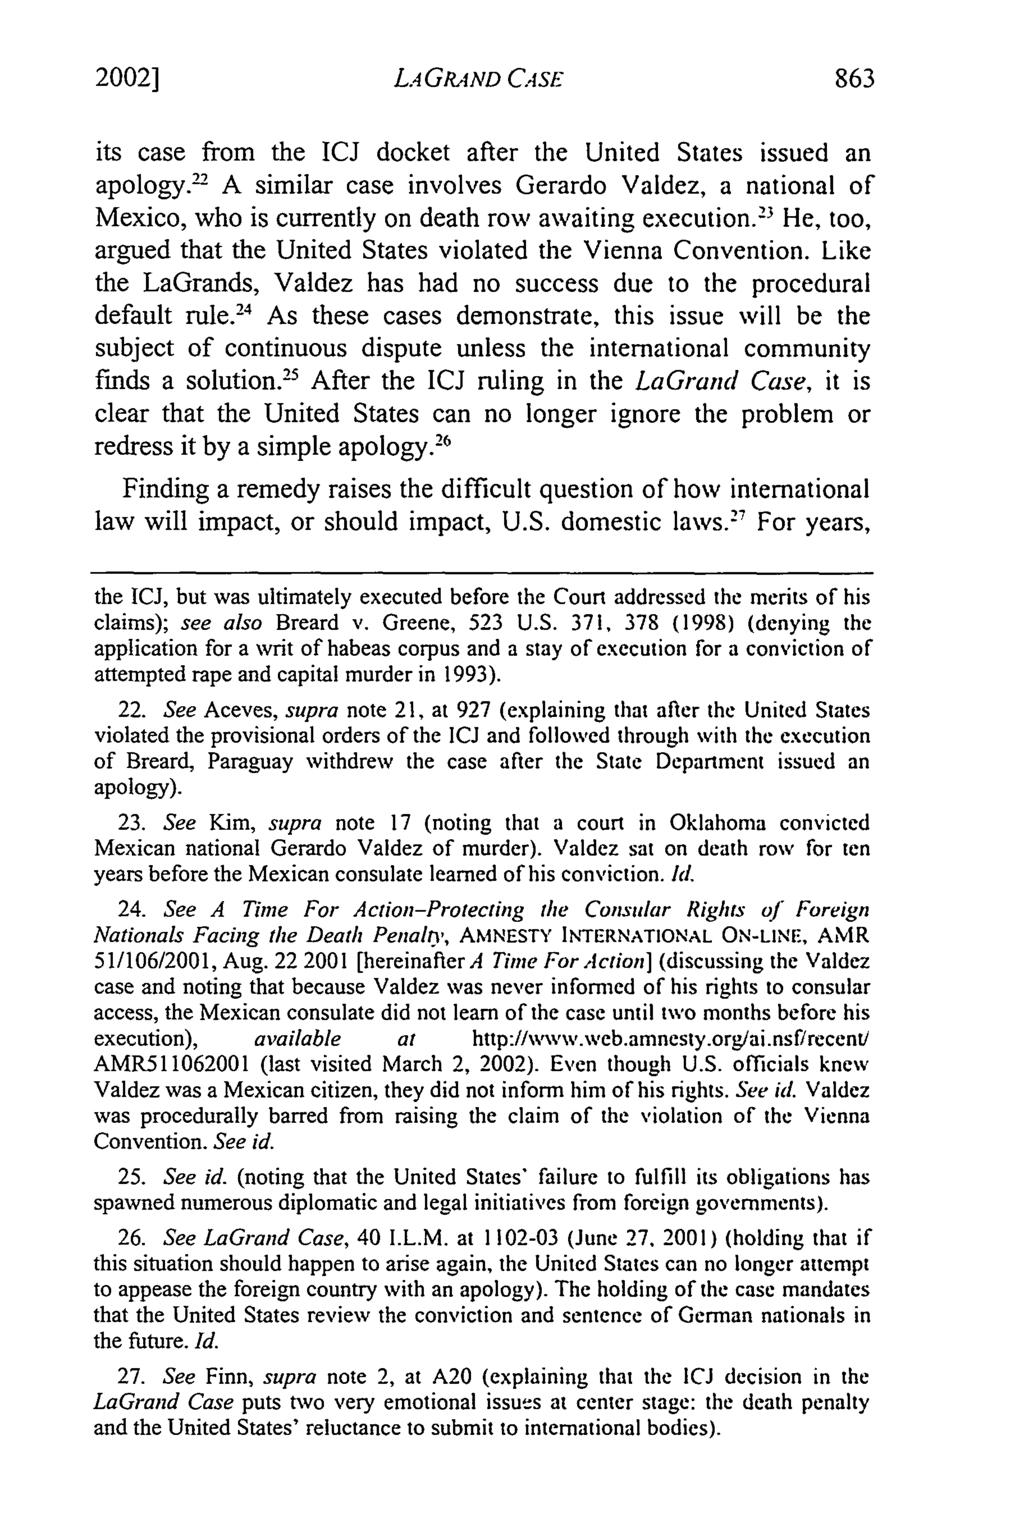 2002] LA GRAND CASE its case from the ICJ docket after the United States issued an apology.